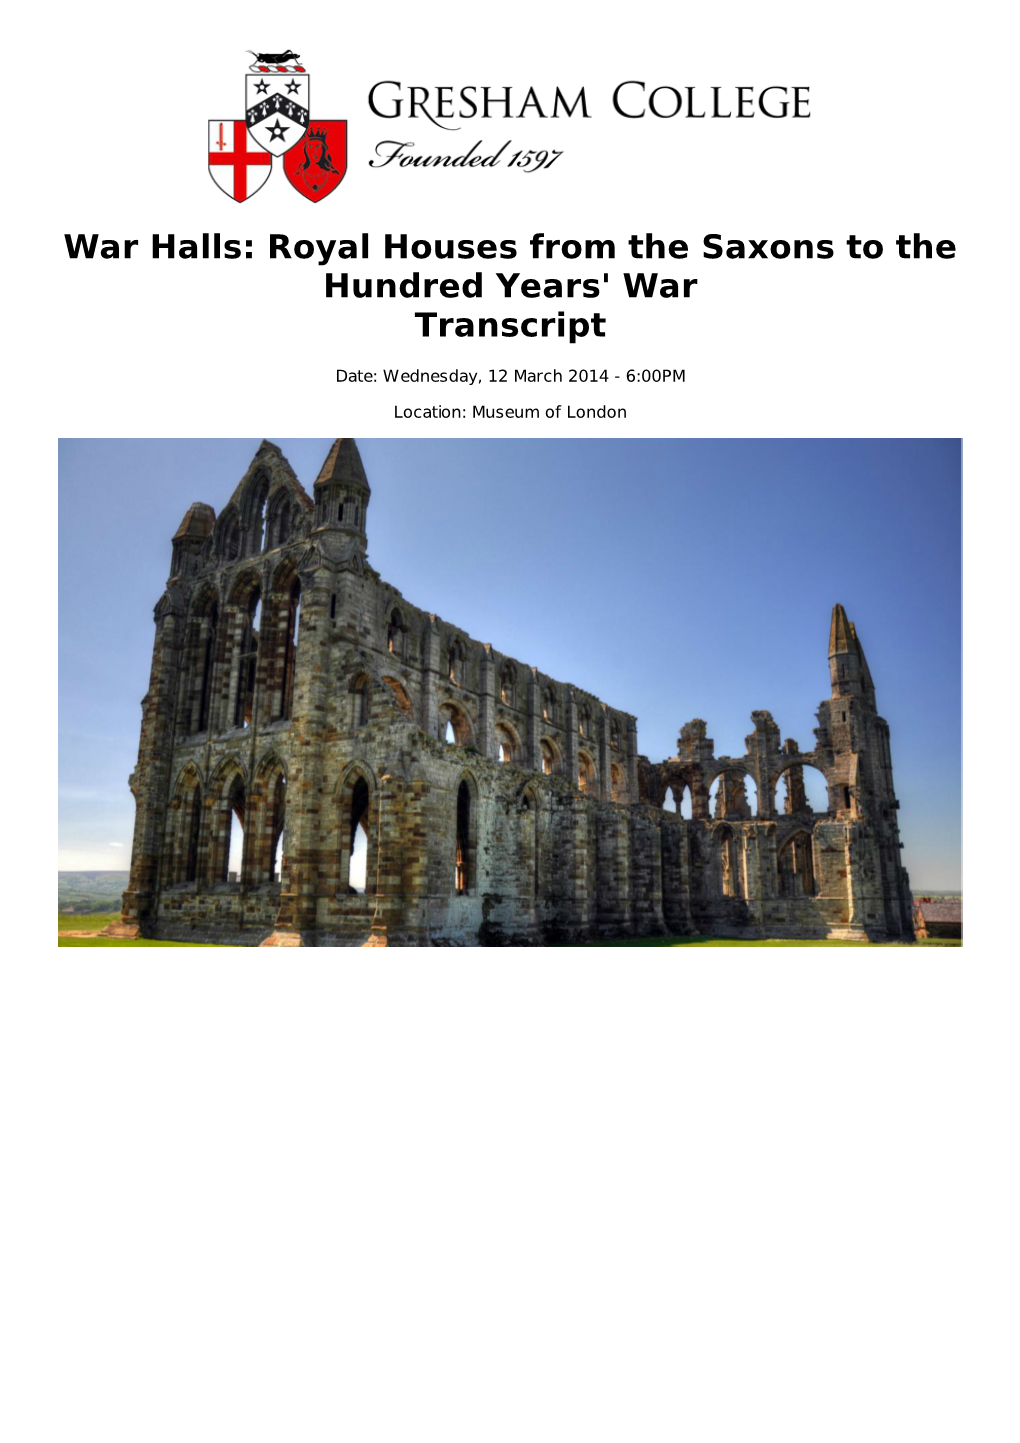 Royal Houses from the Saxons to the Hundred Years' War Transcript